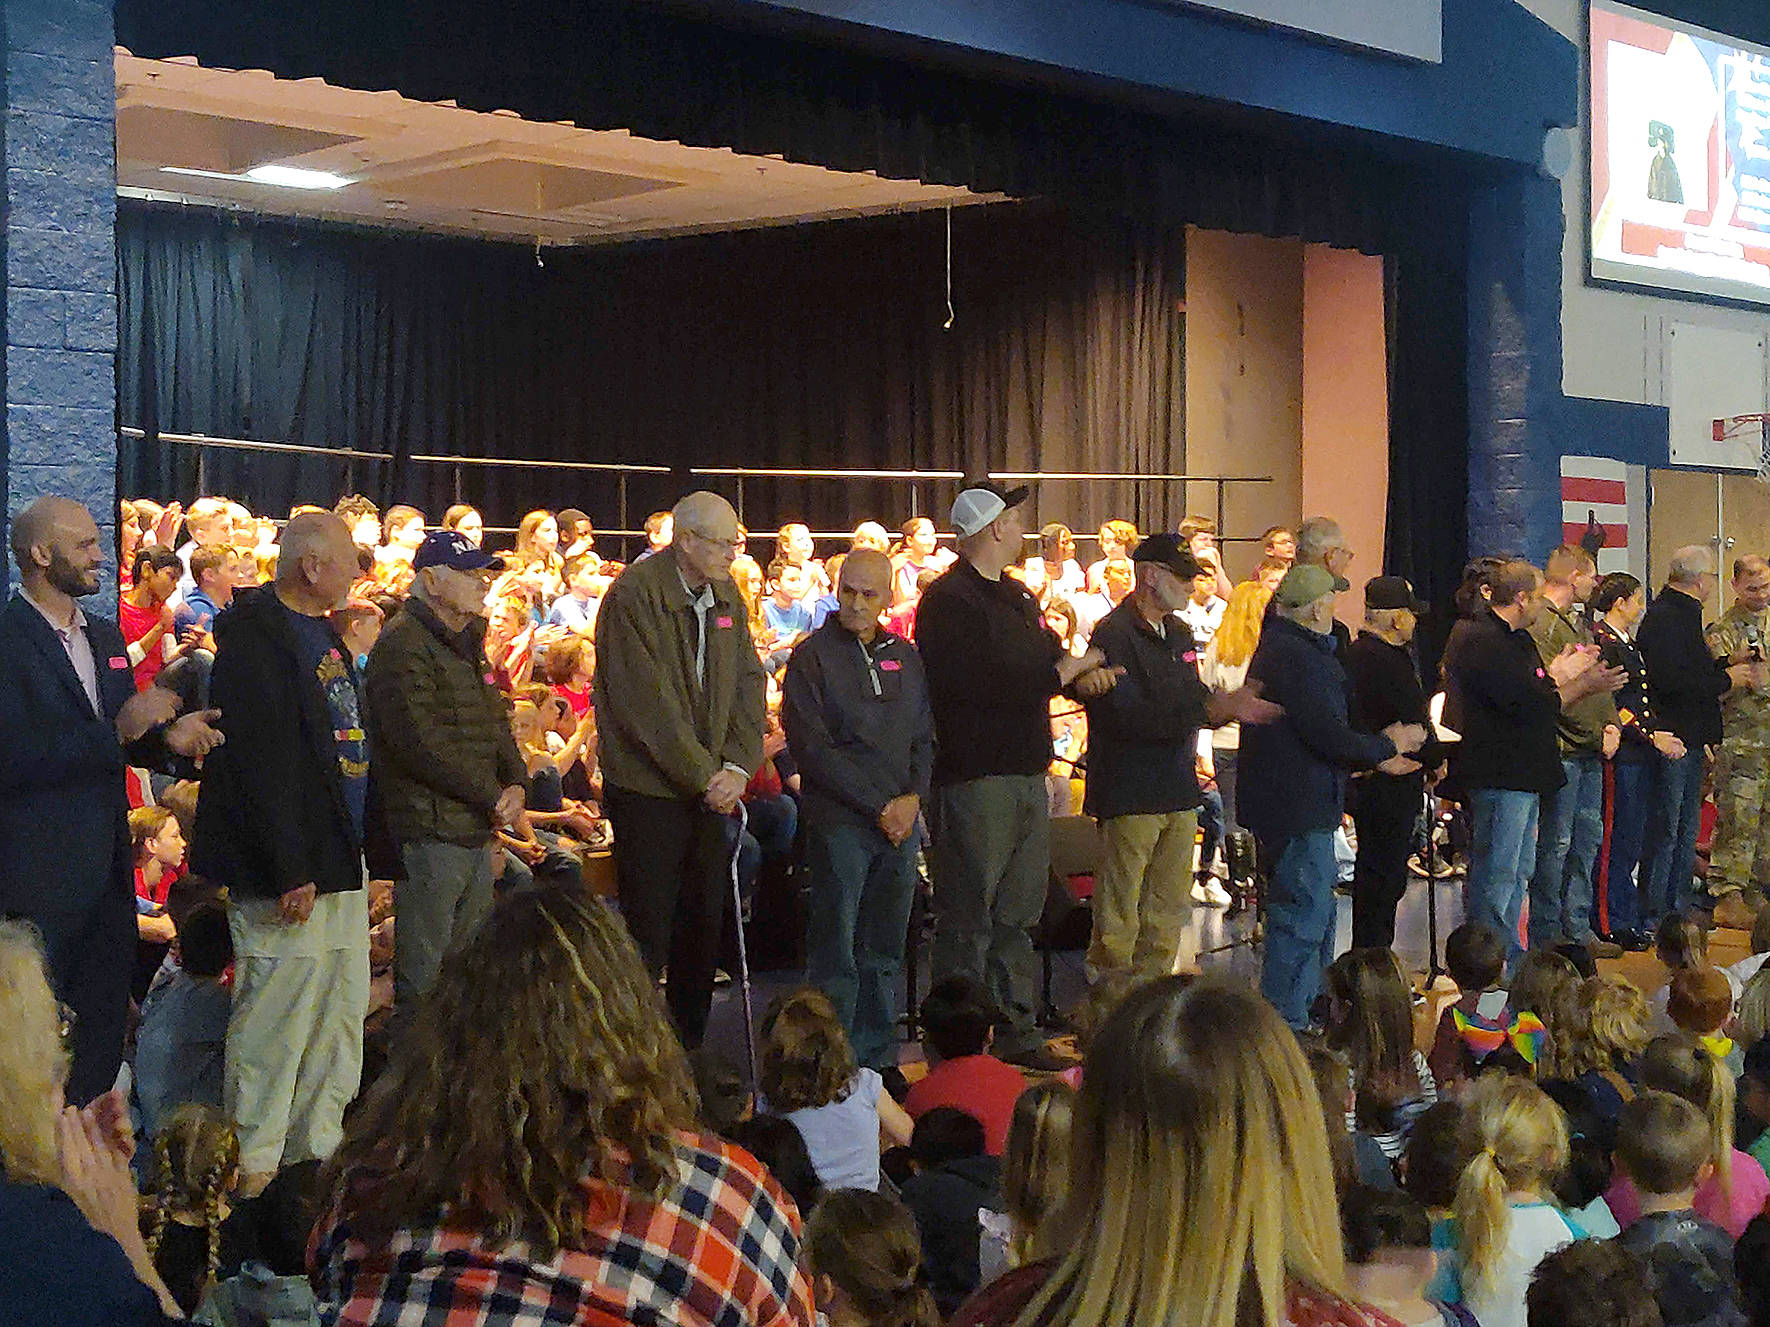 Veterans in the crowd were asked to stand near the stage during a special Veterans Day Assembly. Veterans introduced themselves, said where they served and for what military branch, and were given roses as a “thank you” for their service by the Glacier Park Elementary School fifth grade class. Photo by Danielle Chastaine.                                 Veterans in the crowd were asked to stand near the stage during a special Veterans Day Assembly. Veterans introduced themselves, said where they served and for what military branch, and were given roses as a “thank you” for their service by the Glacier Park Elementary School fifth grade class. Photo by Danielle Chastaine.